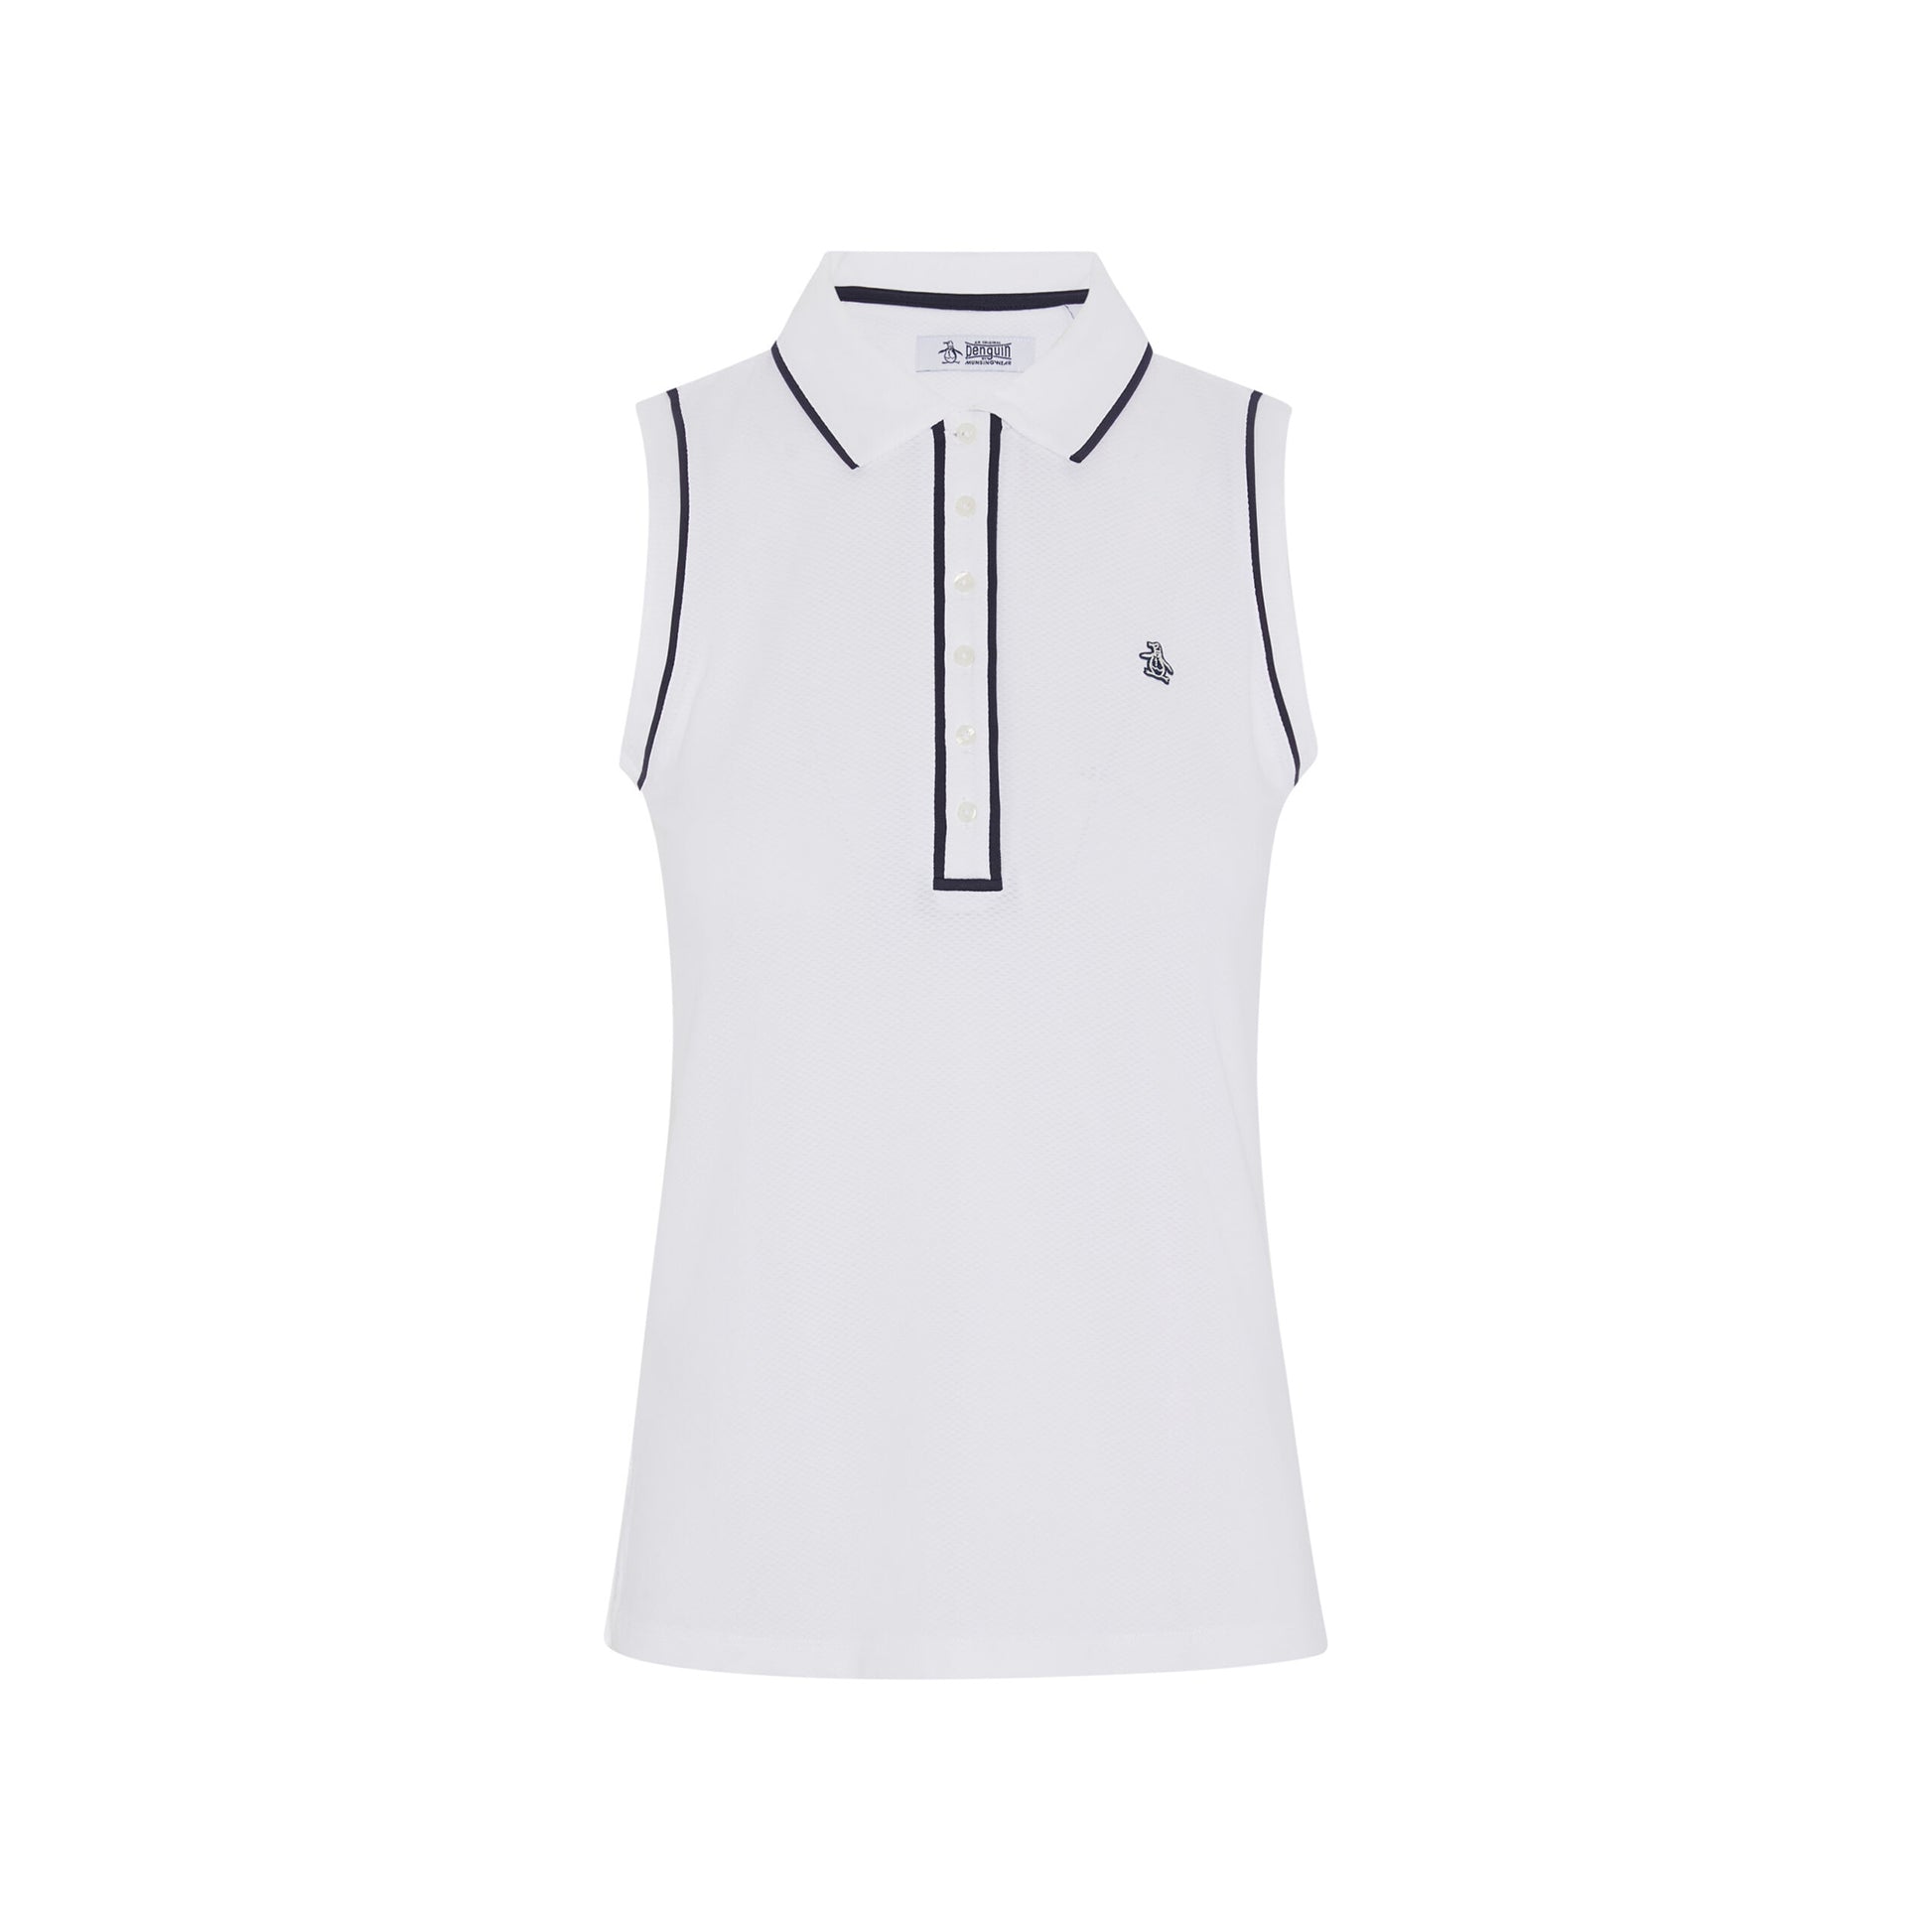 Original Penguin Women's Sleeveless Polo in Bright White with Contrast Piping